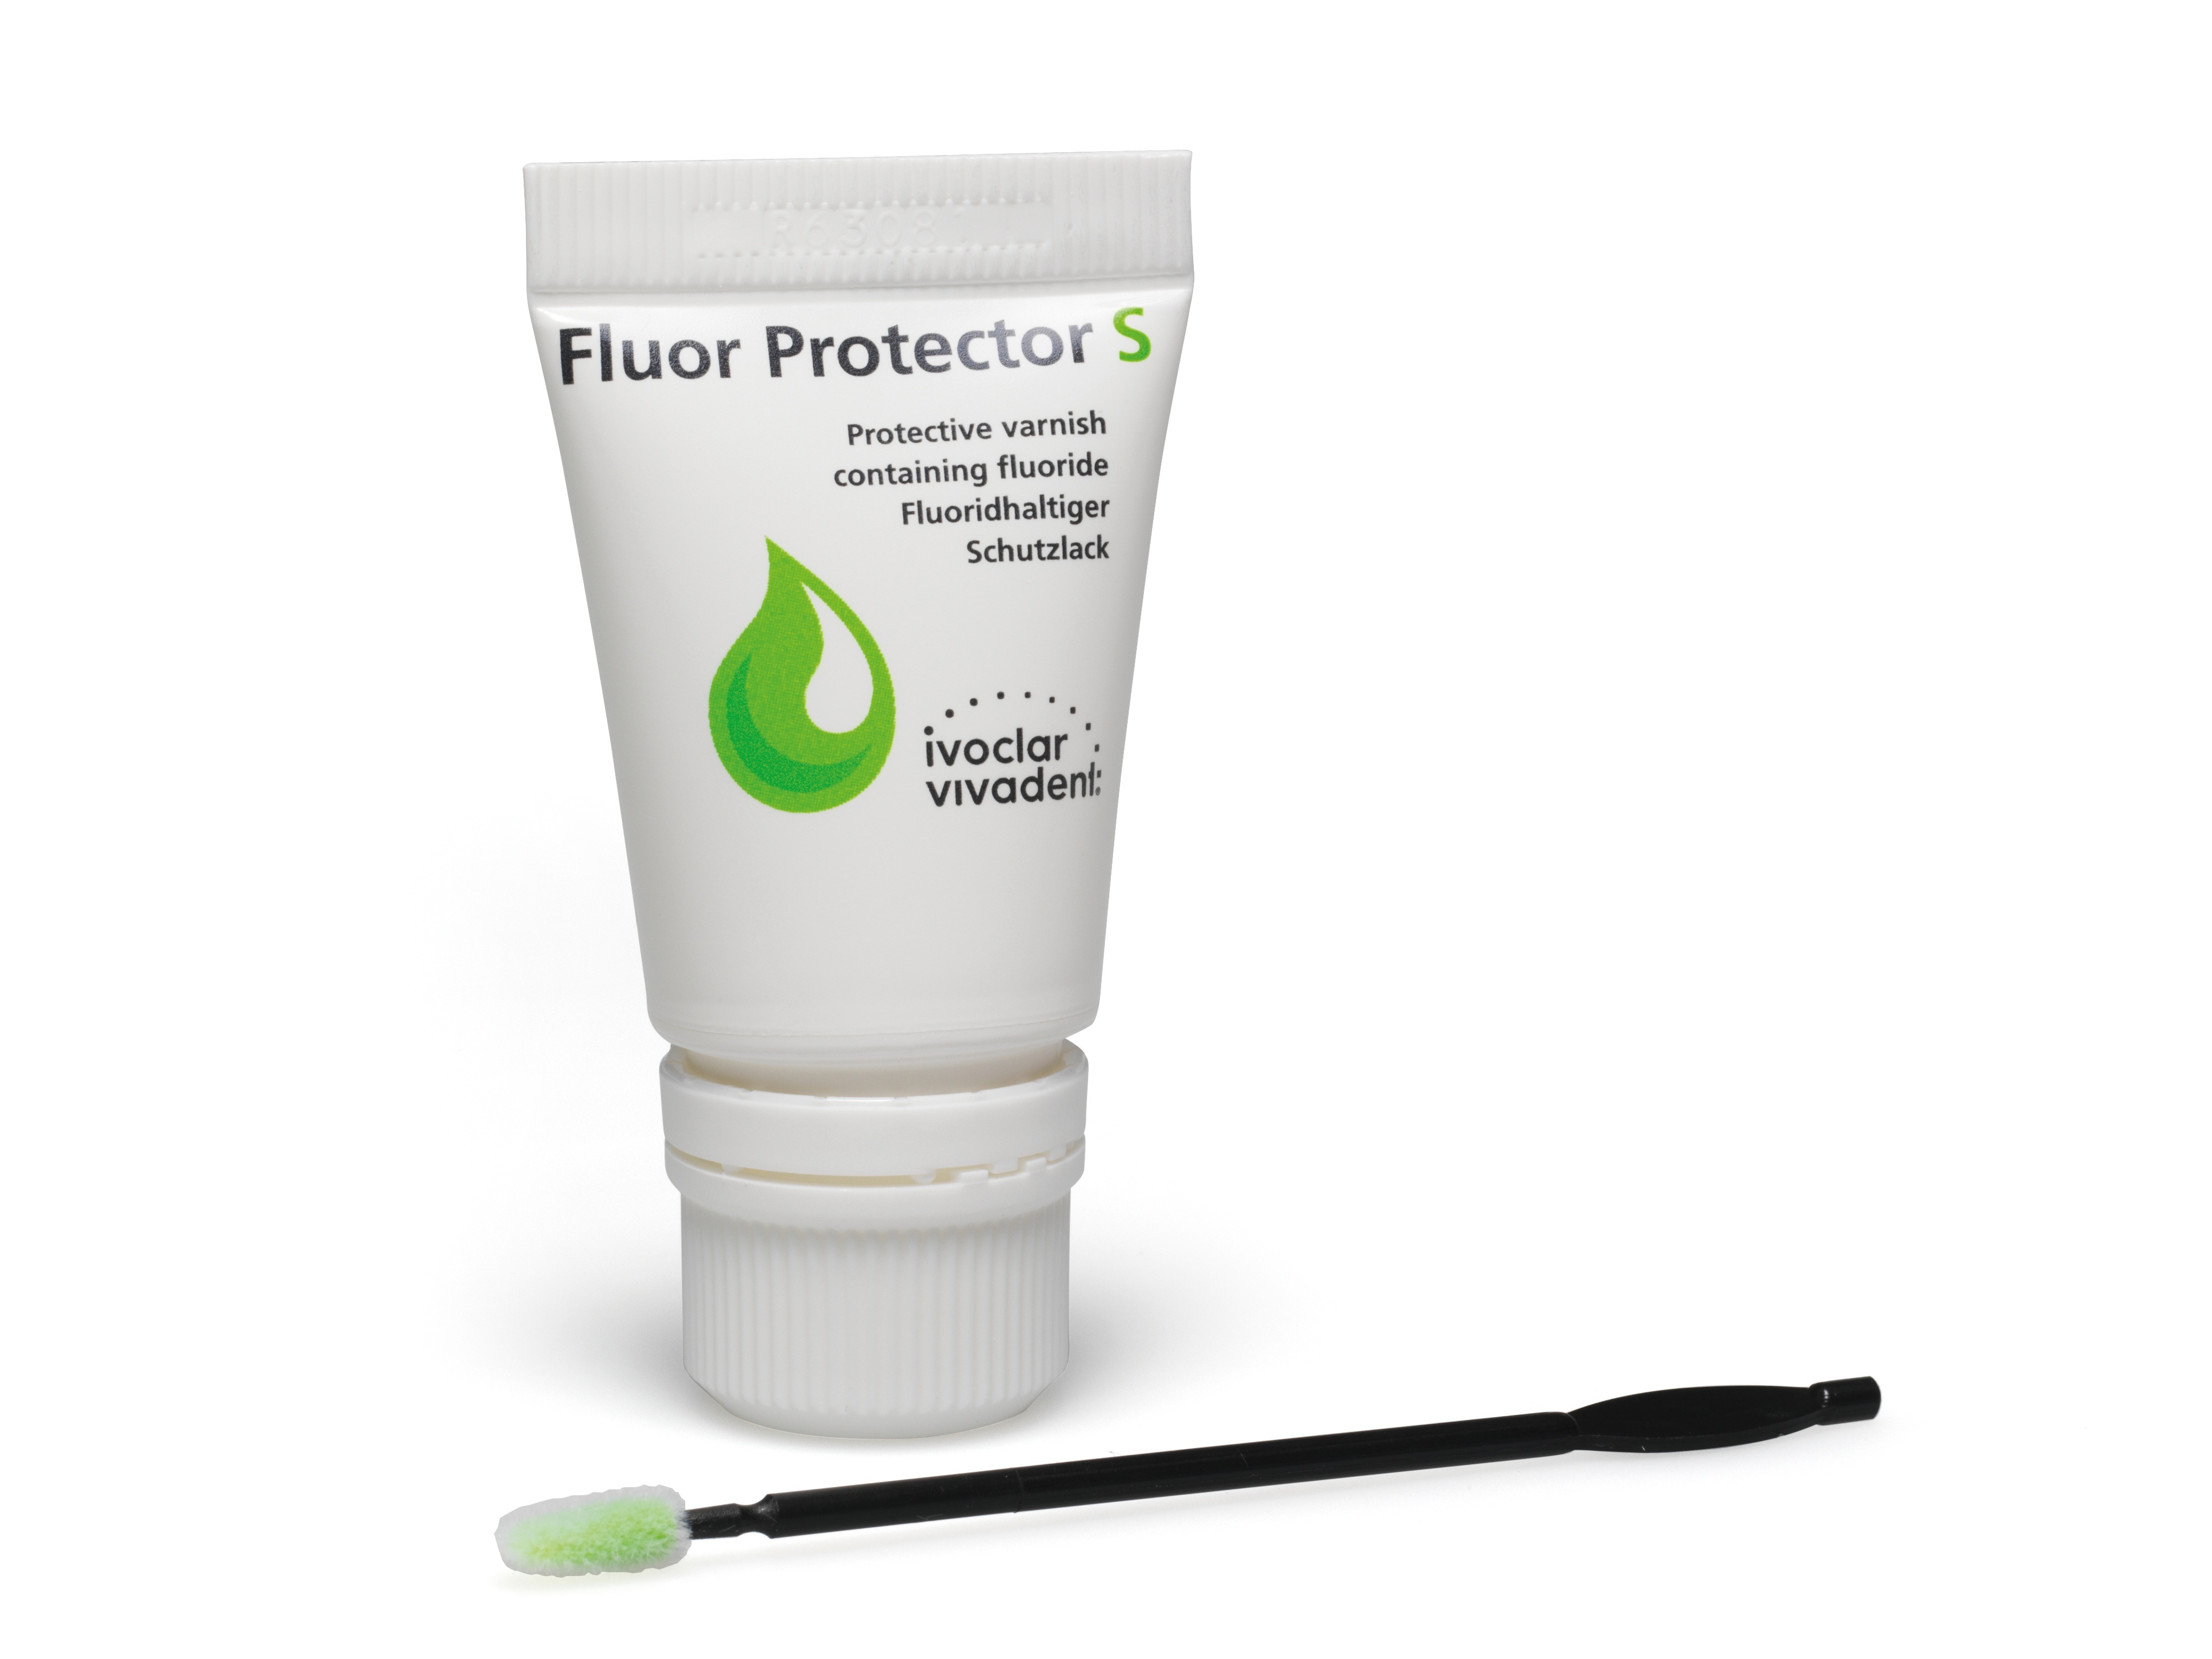 Fluor Protector S in a dispensing tube including applicator